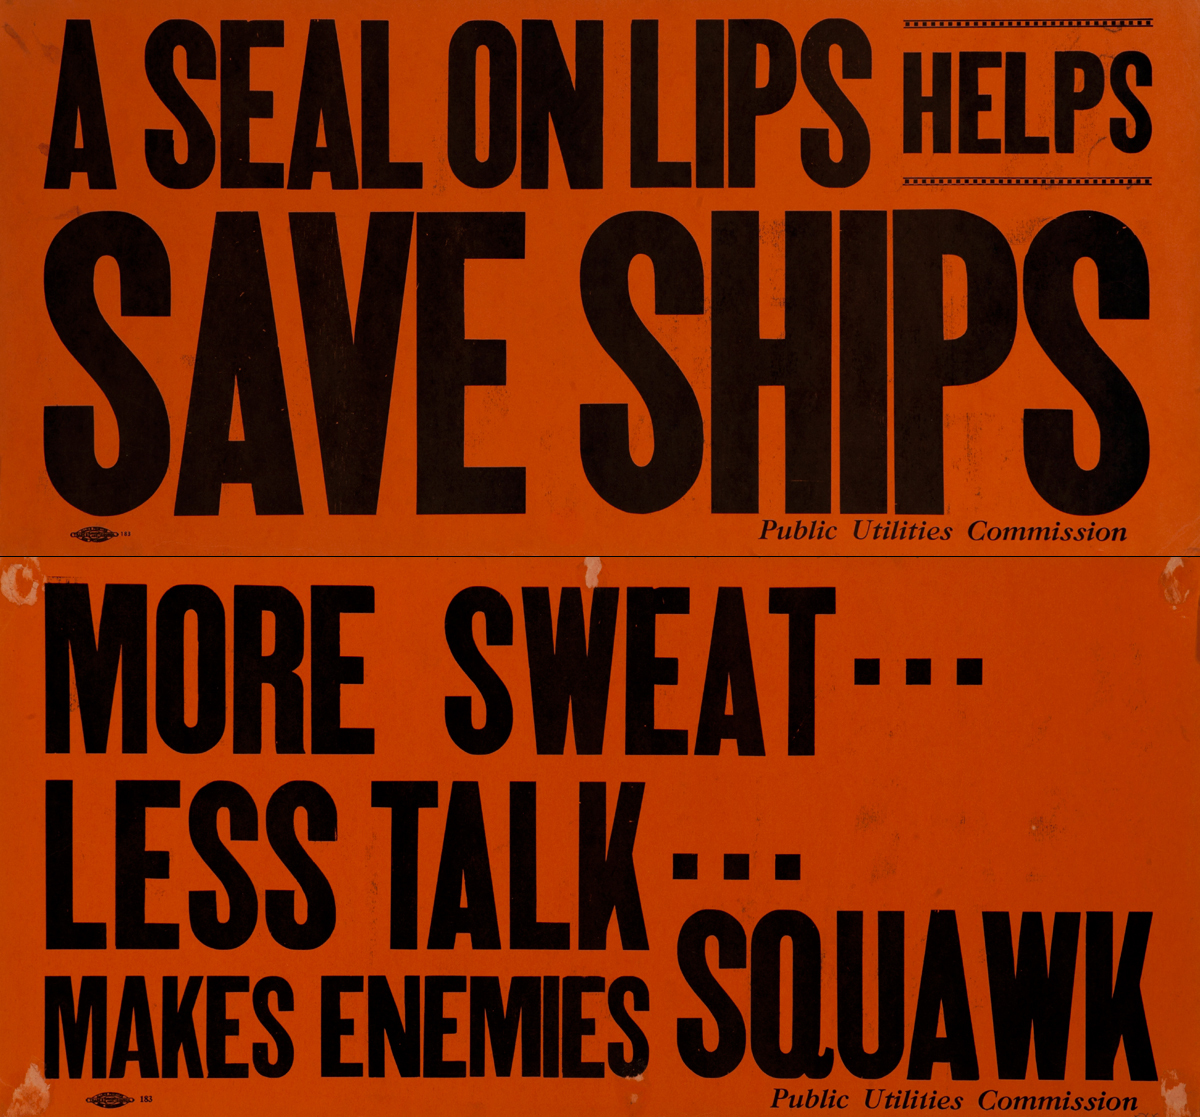 A Seal on lips helps save ships / More Sweat Less talk Makes enemies Squawk<br>2 Sided WWII Public Utilities Commision Poster